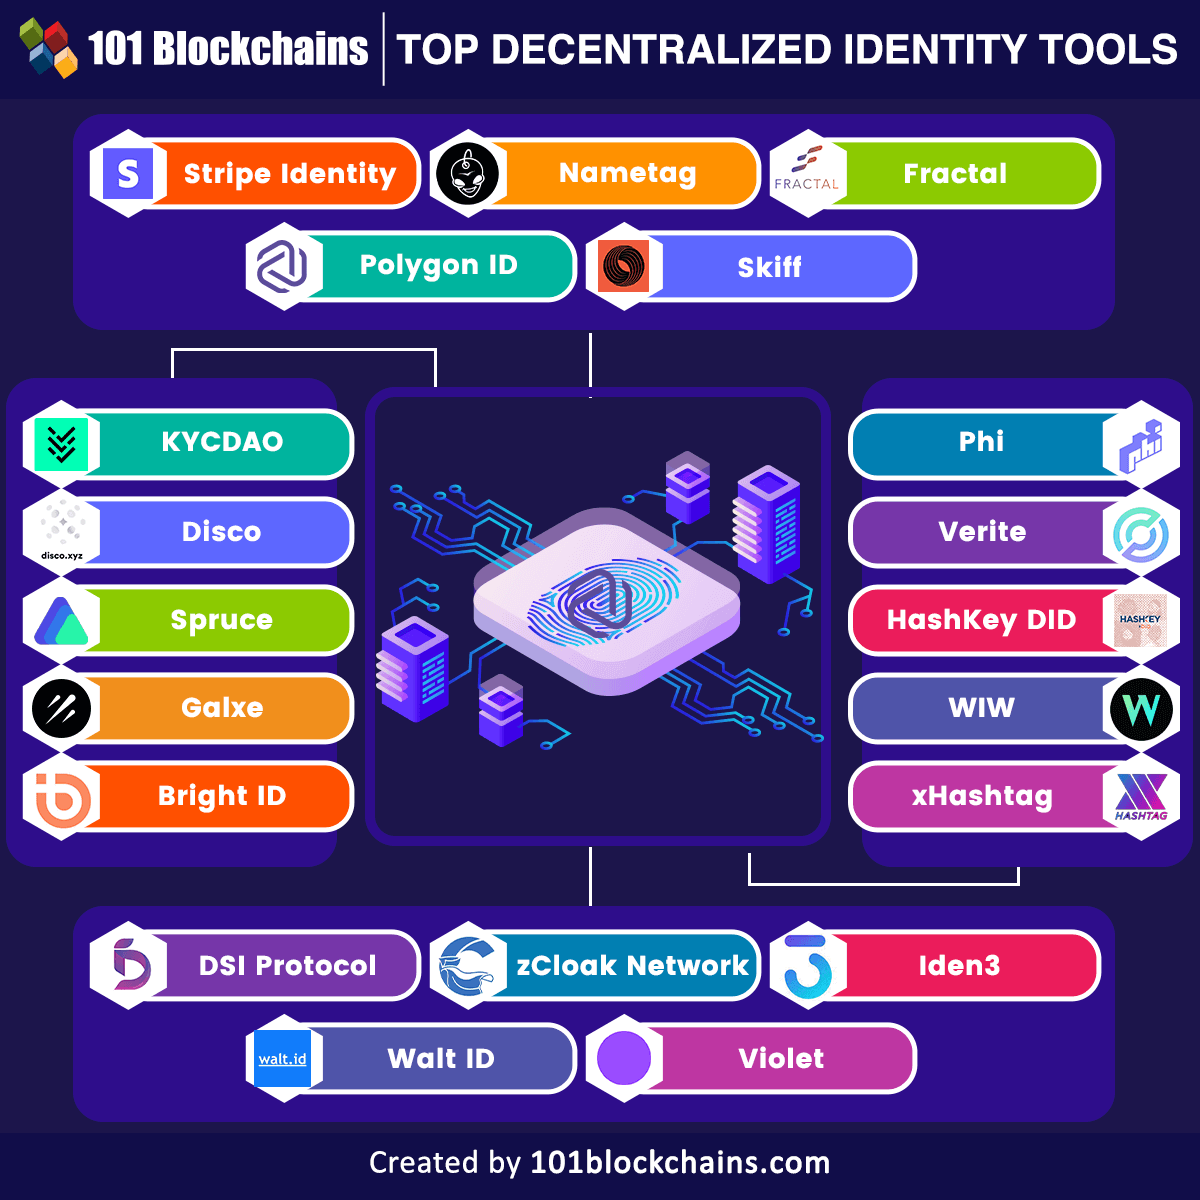 Top Decentralized Identity Tools